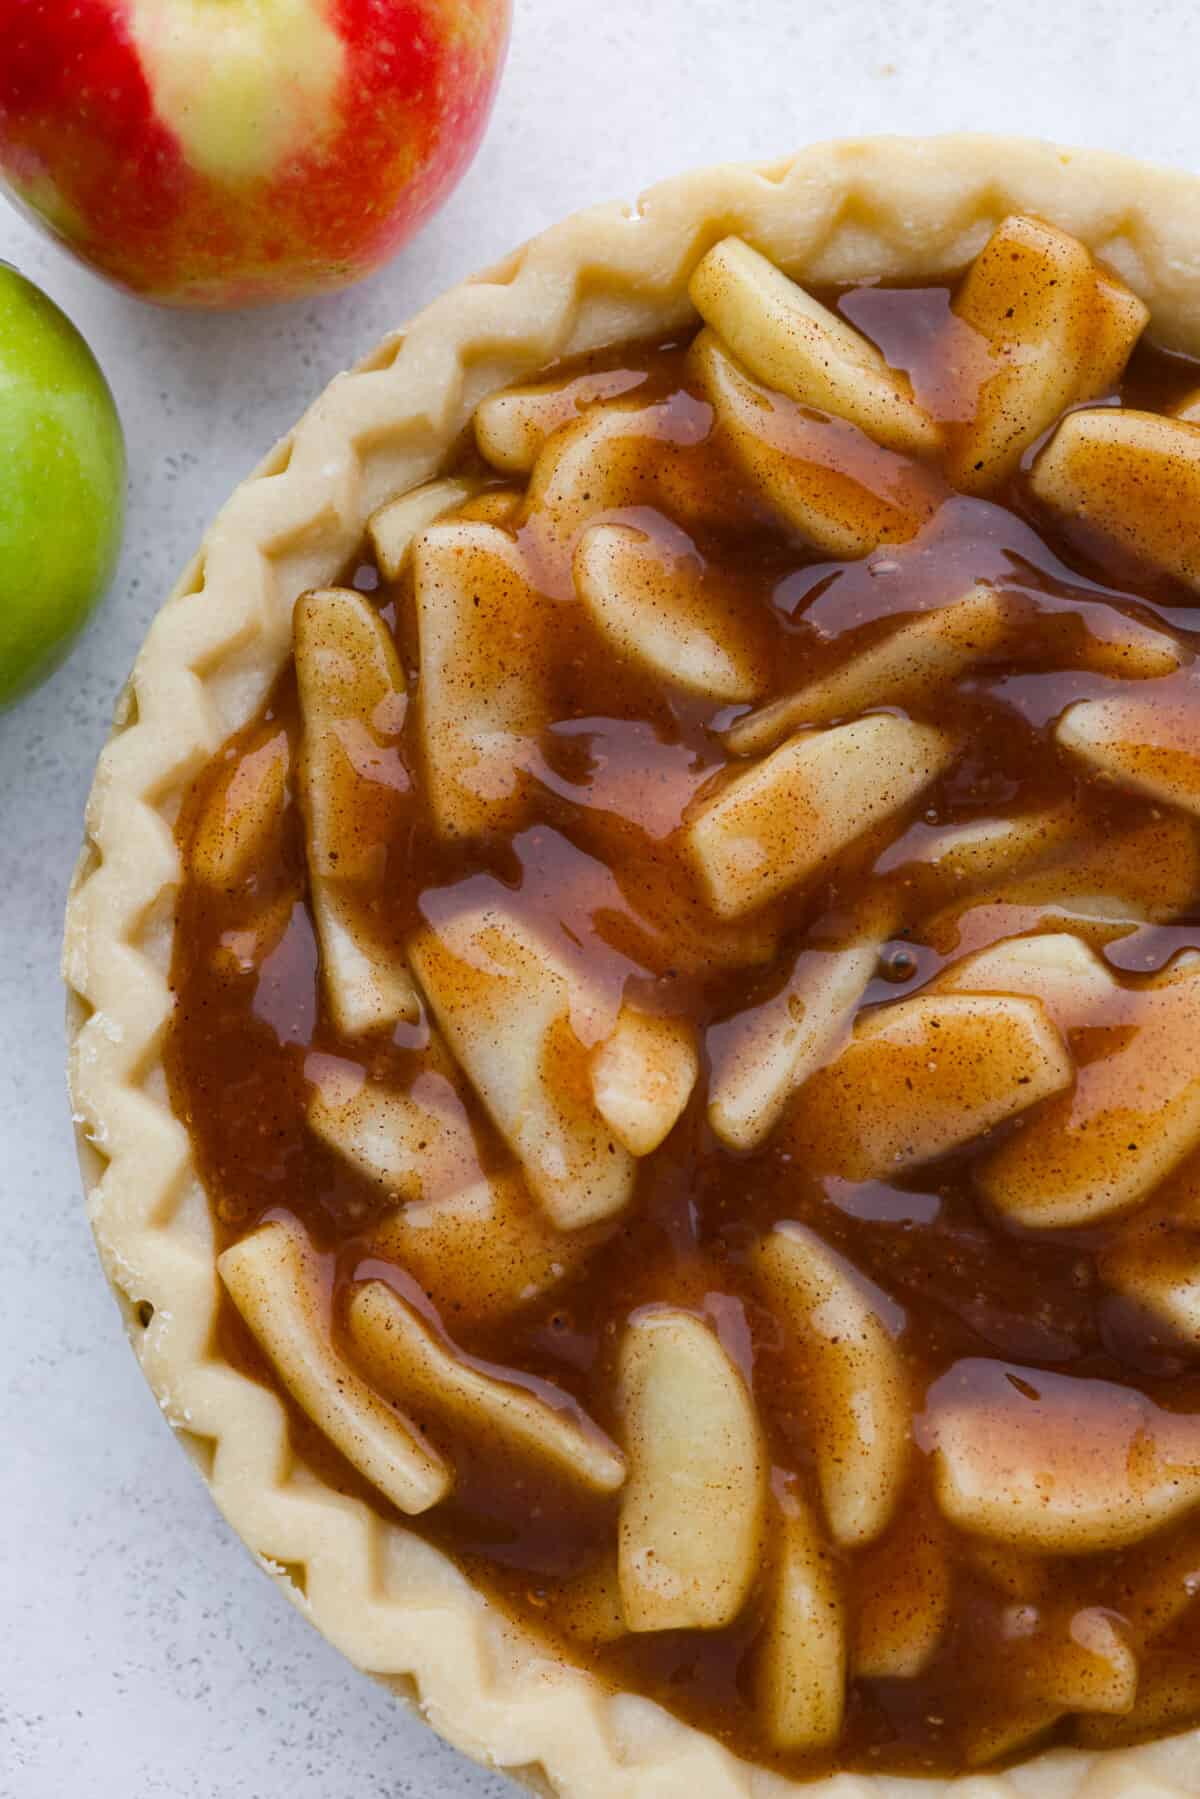 Apple filling added to a pie crust.